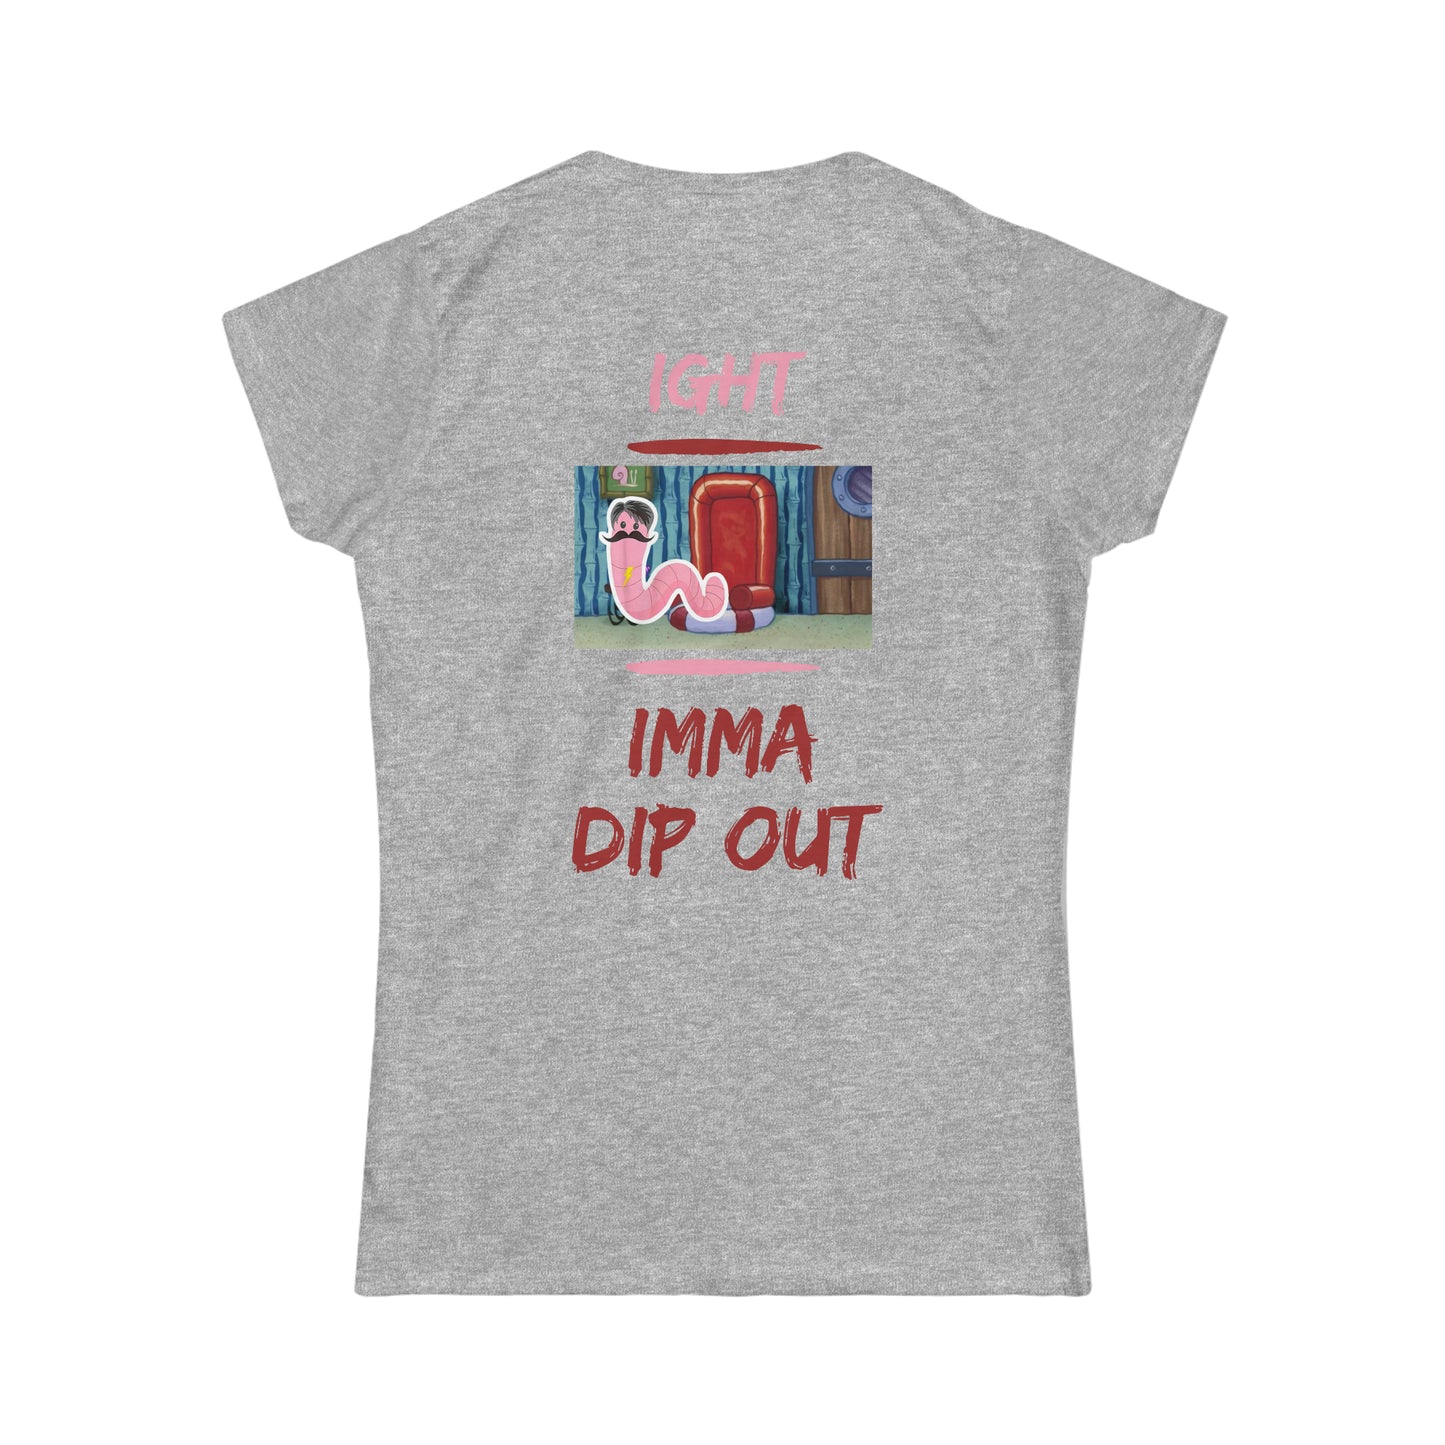 Dip Out Women's Softstyle Tee